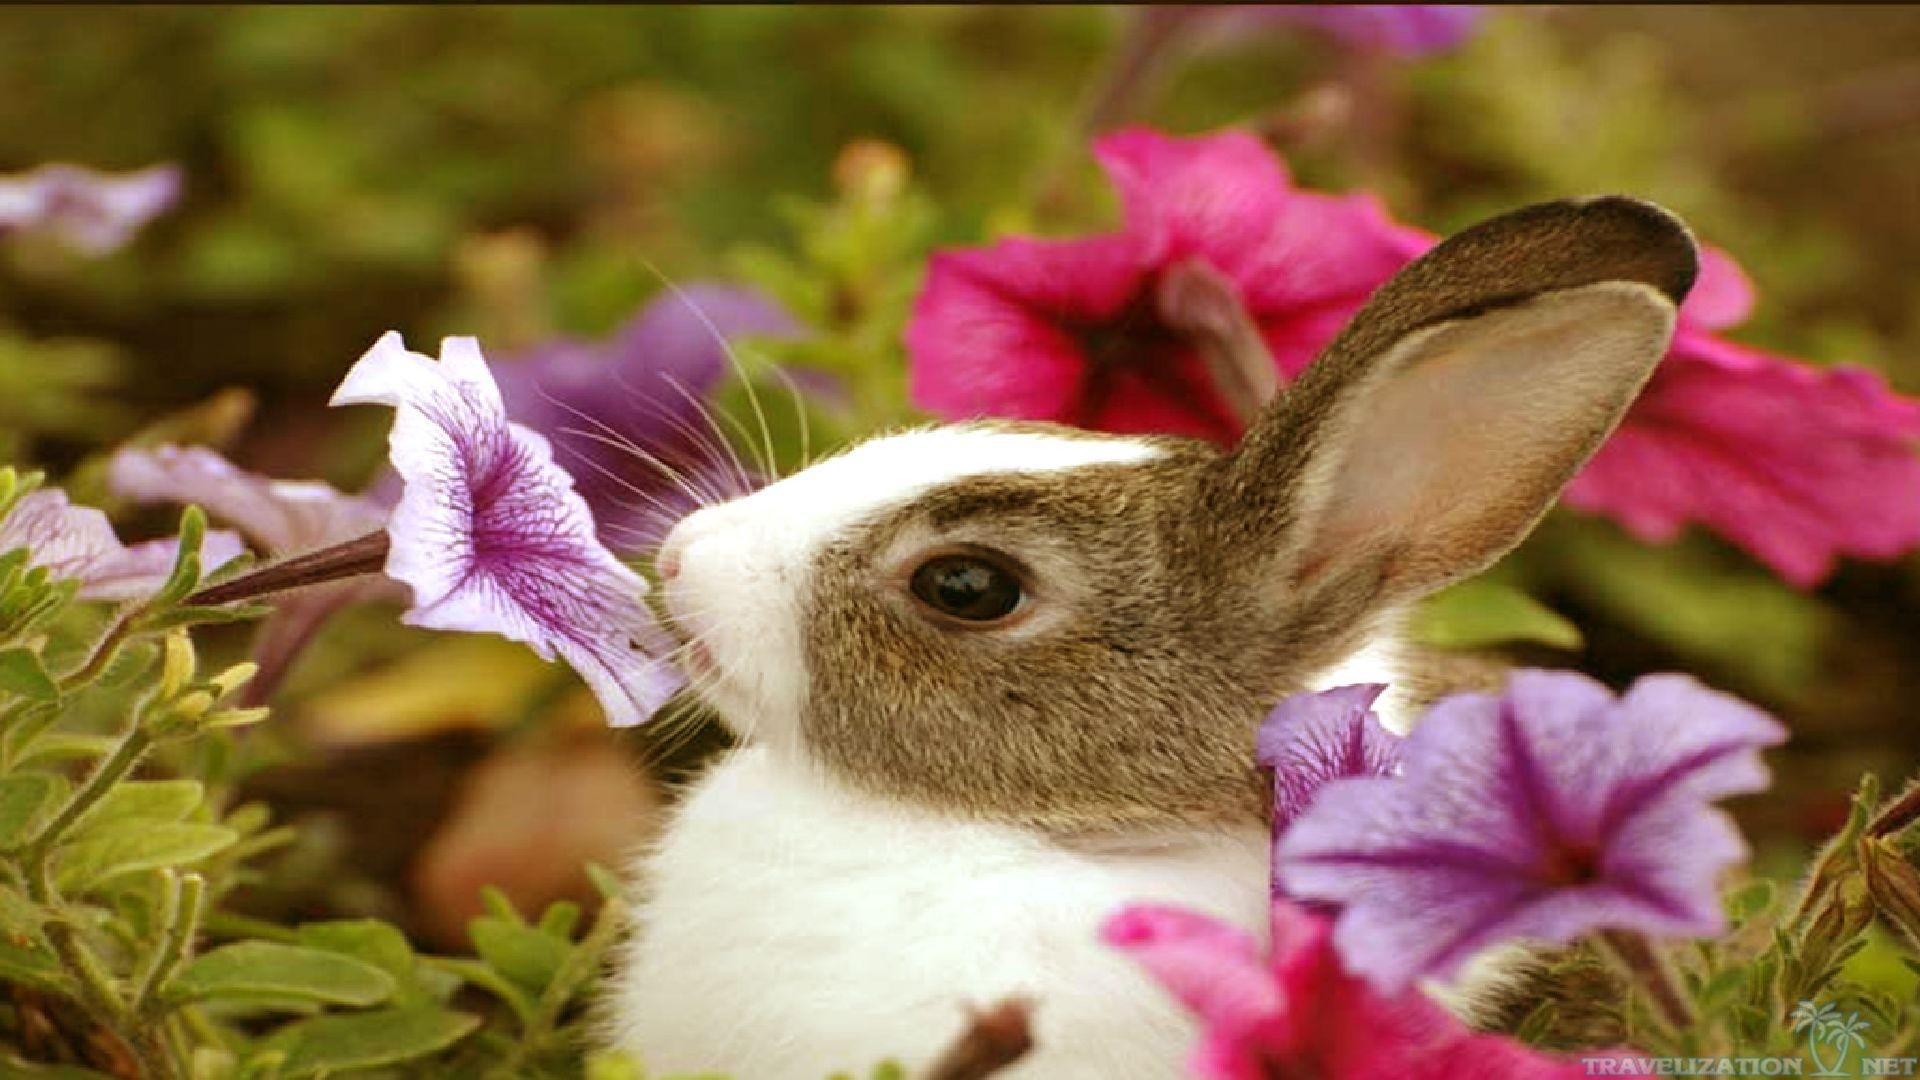 baby animal wallpaper,domestic rabbit,rabbits and hares,rabbit,plant,snout